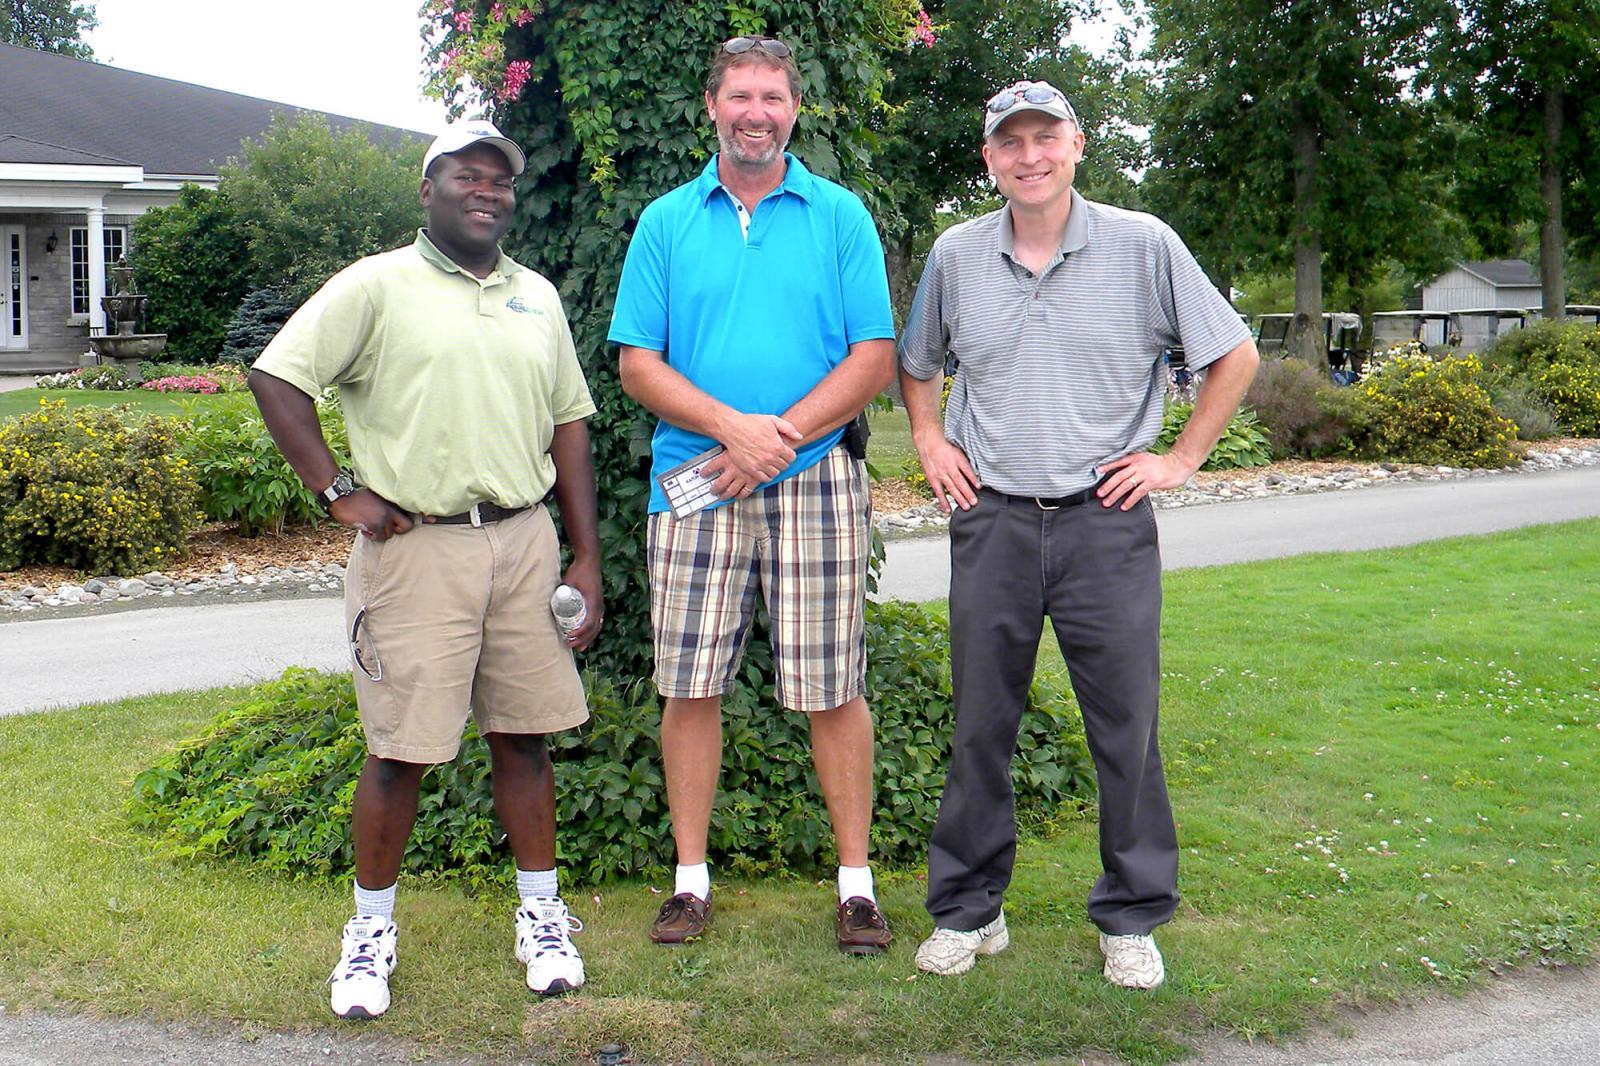 The Upper Canada Golf Tournament took place at the Loyalist Golf Club in Bath with about 50 golfers taking part this year. In photo, from left, Ernest Williams from Aquascape, with member of the Chapter golf committee Stephen Poole of Connon Nurseries/CBV, Trenton, and Mark Norris from EMC, a local community newspaper.